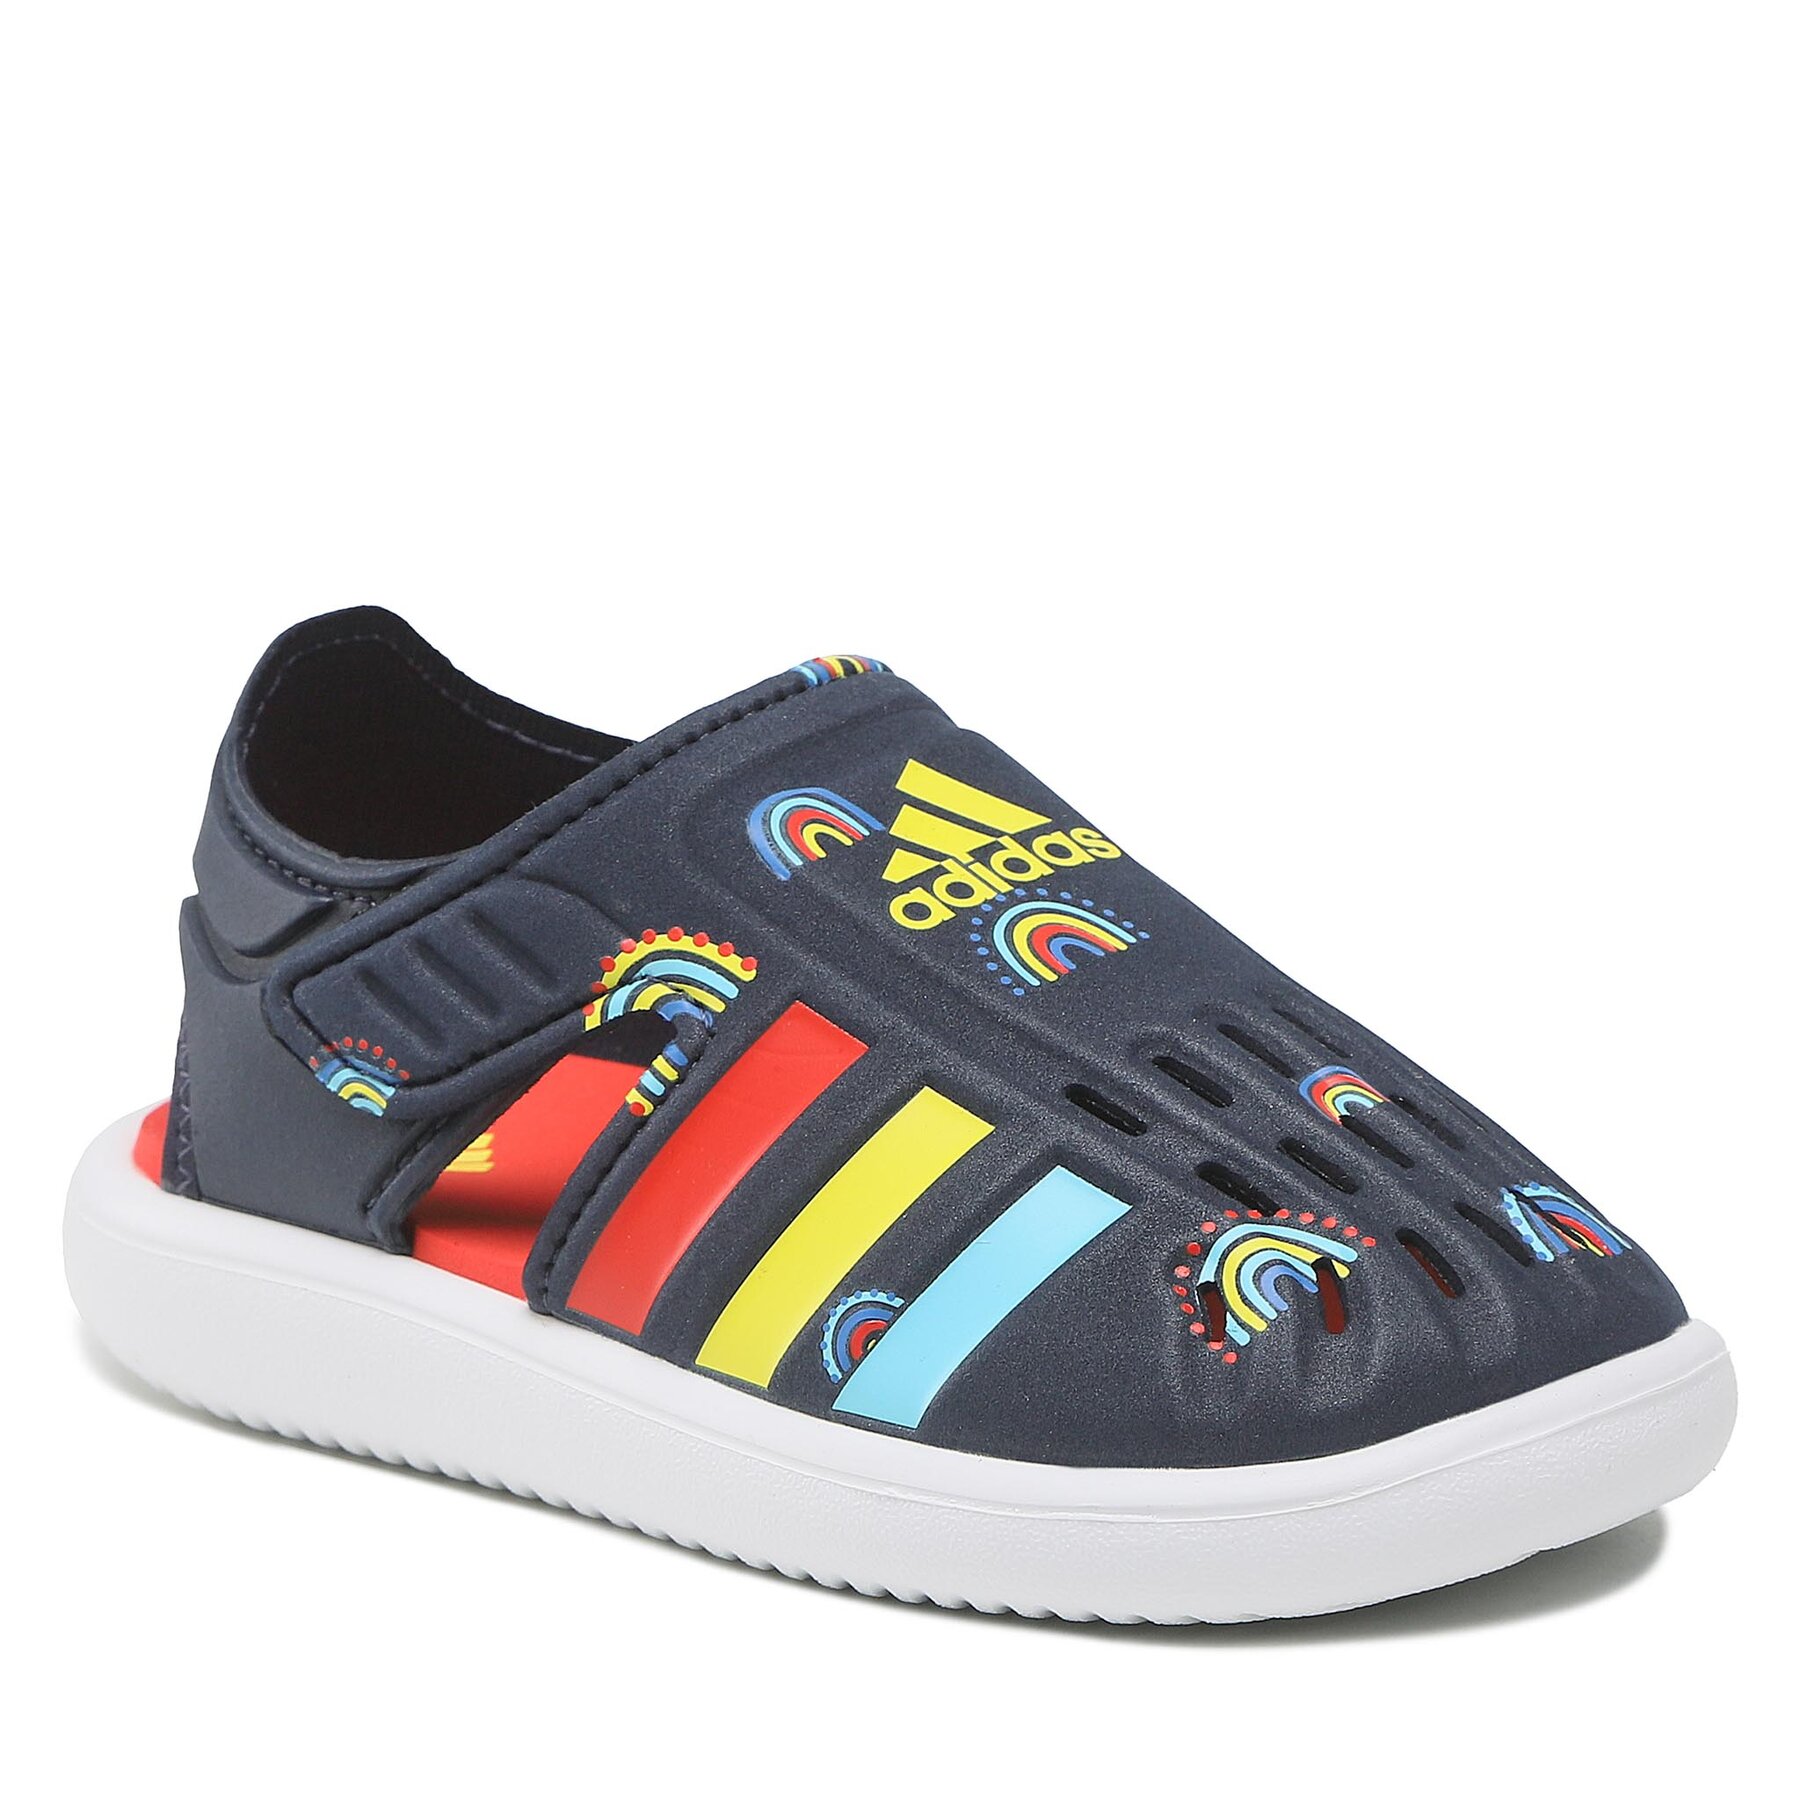 Sandale adidas Water Sandal C GY2459 Navy